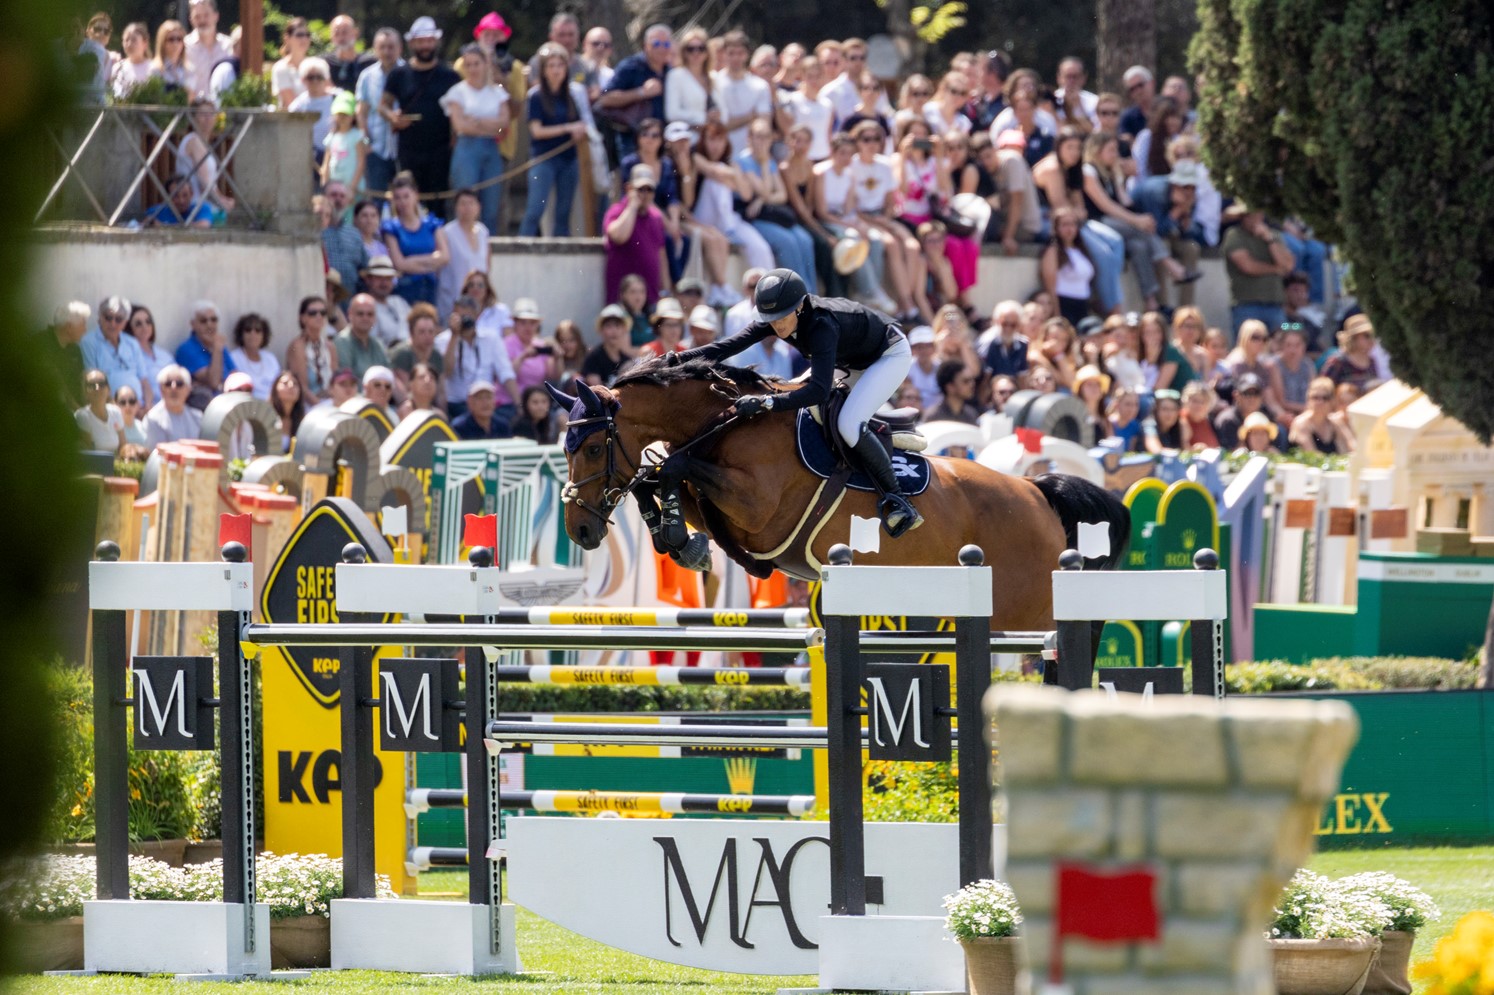 Stephex rider, Petronella Andersson  and Odina Van  Klapscheut finished their Rolex Grand prix with a third place